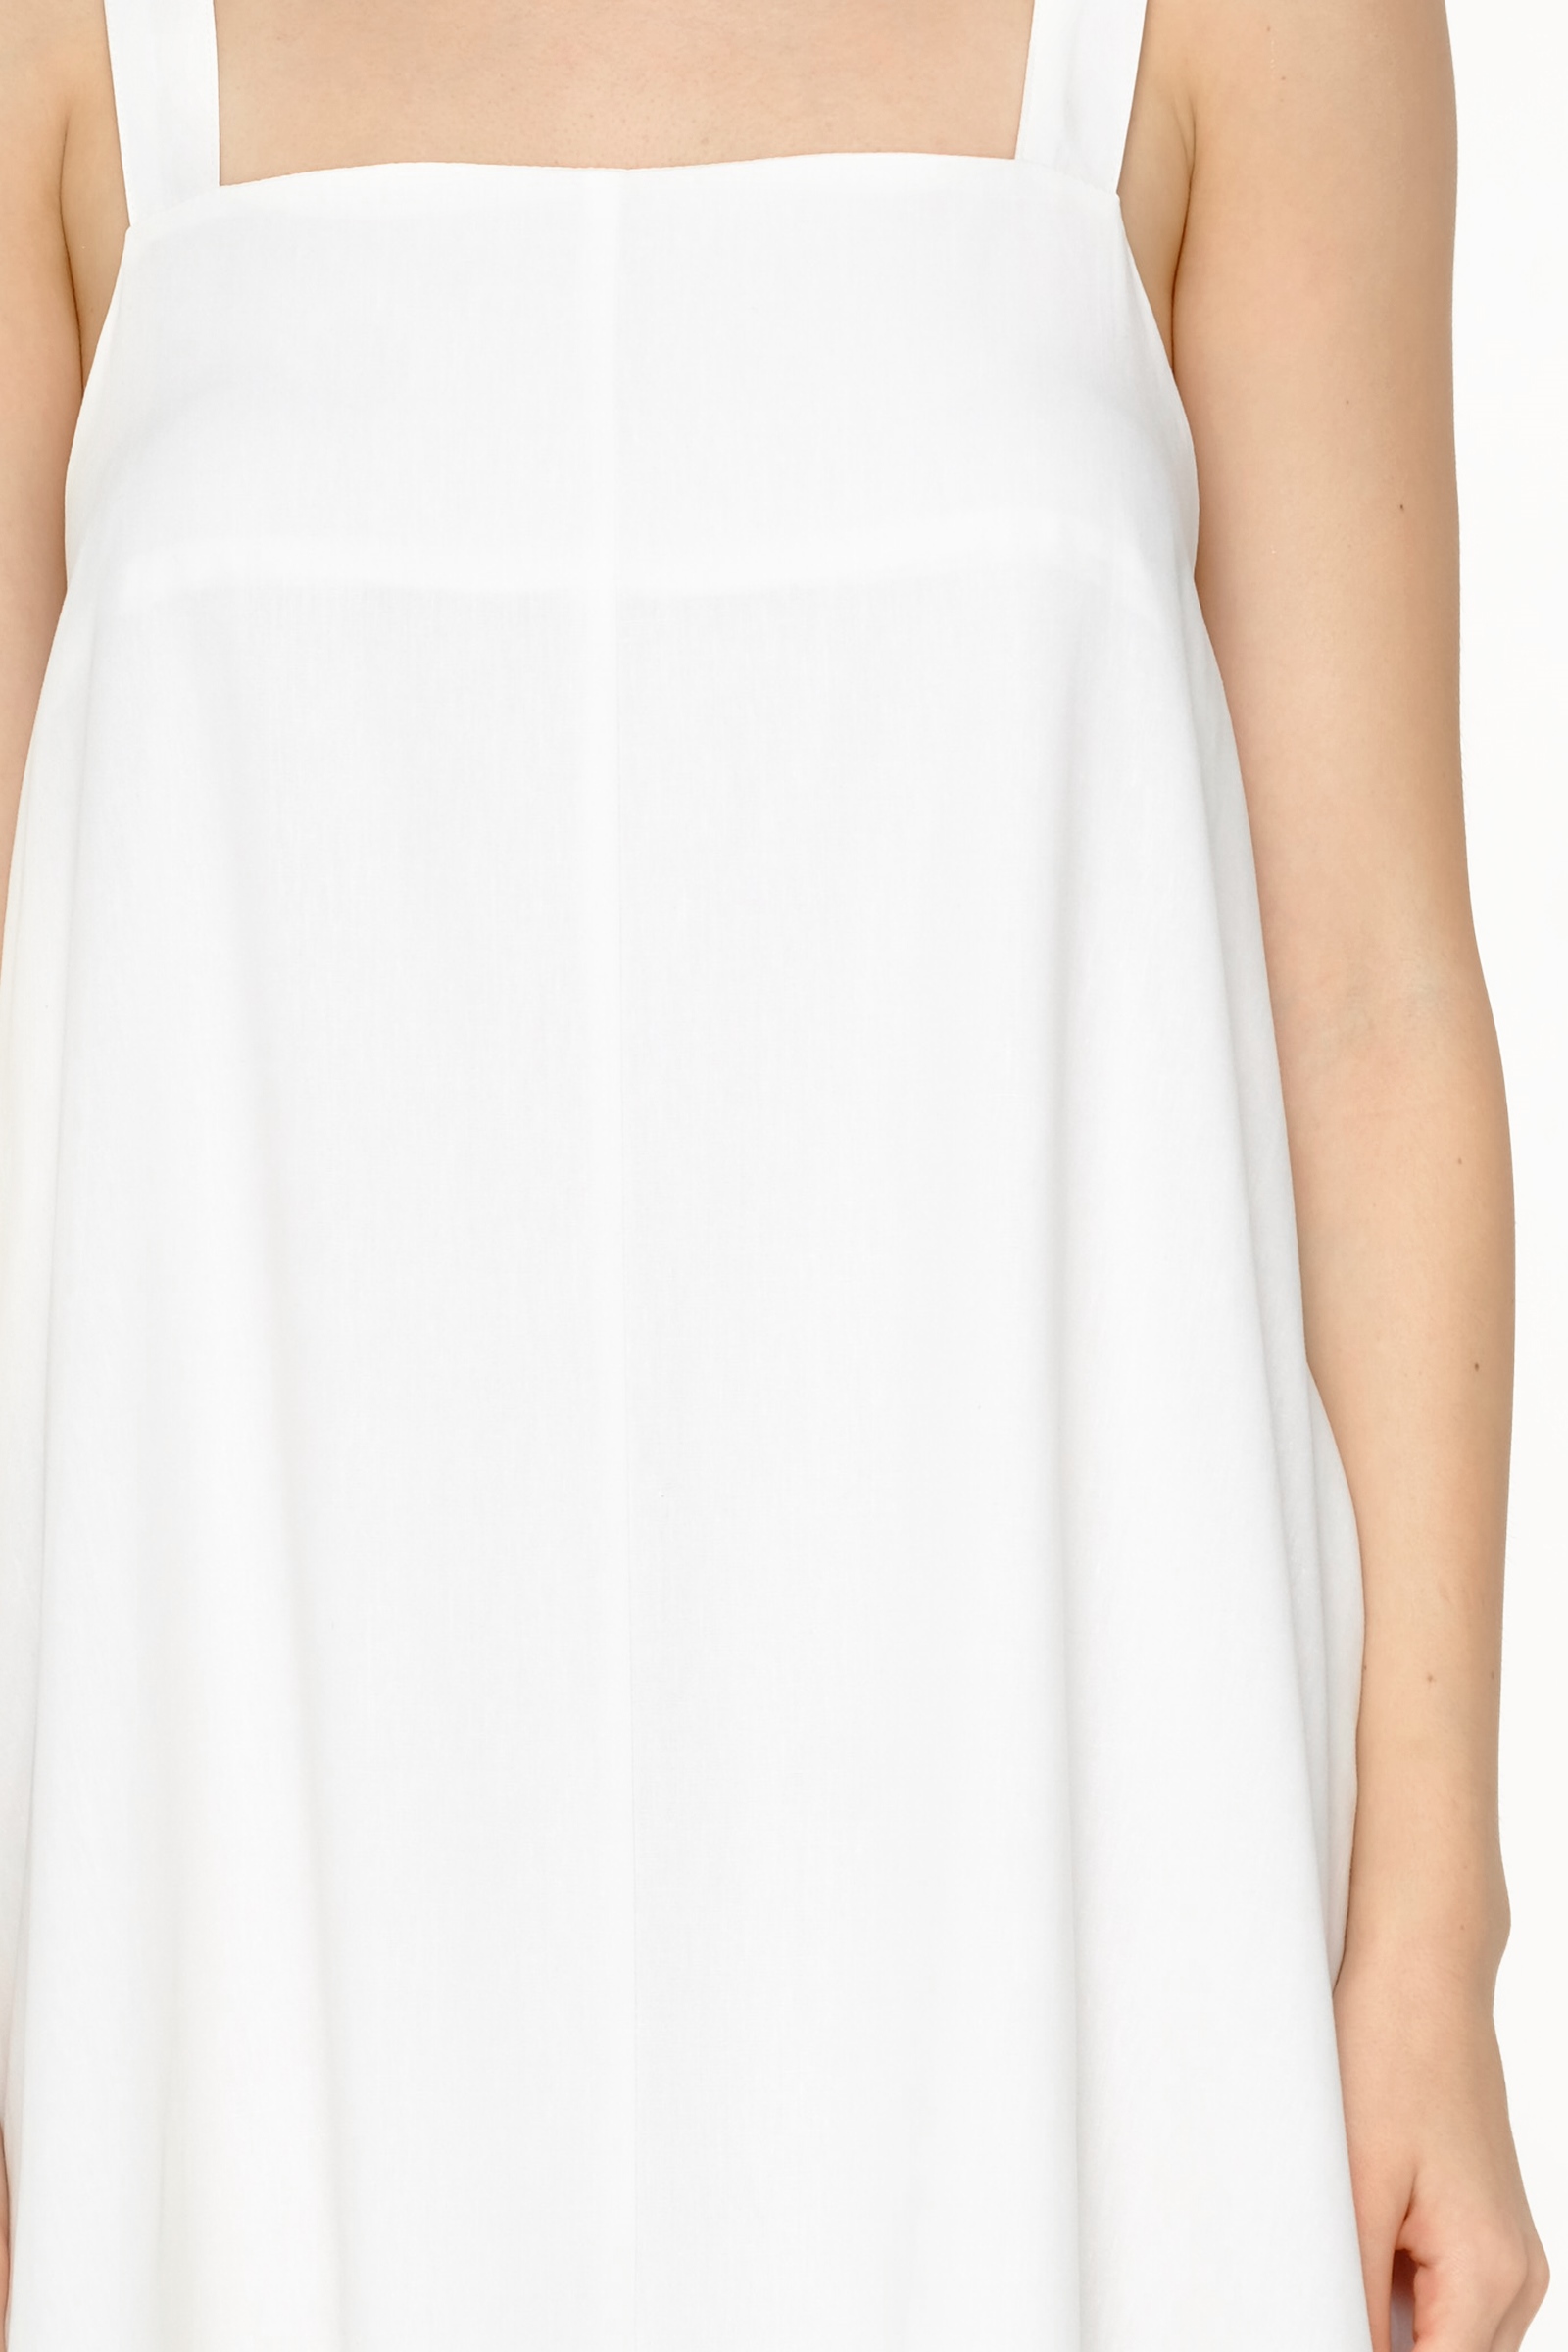 Picture of MOLLIE DRESS IVORY 